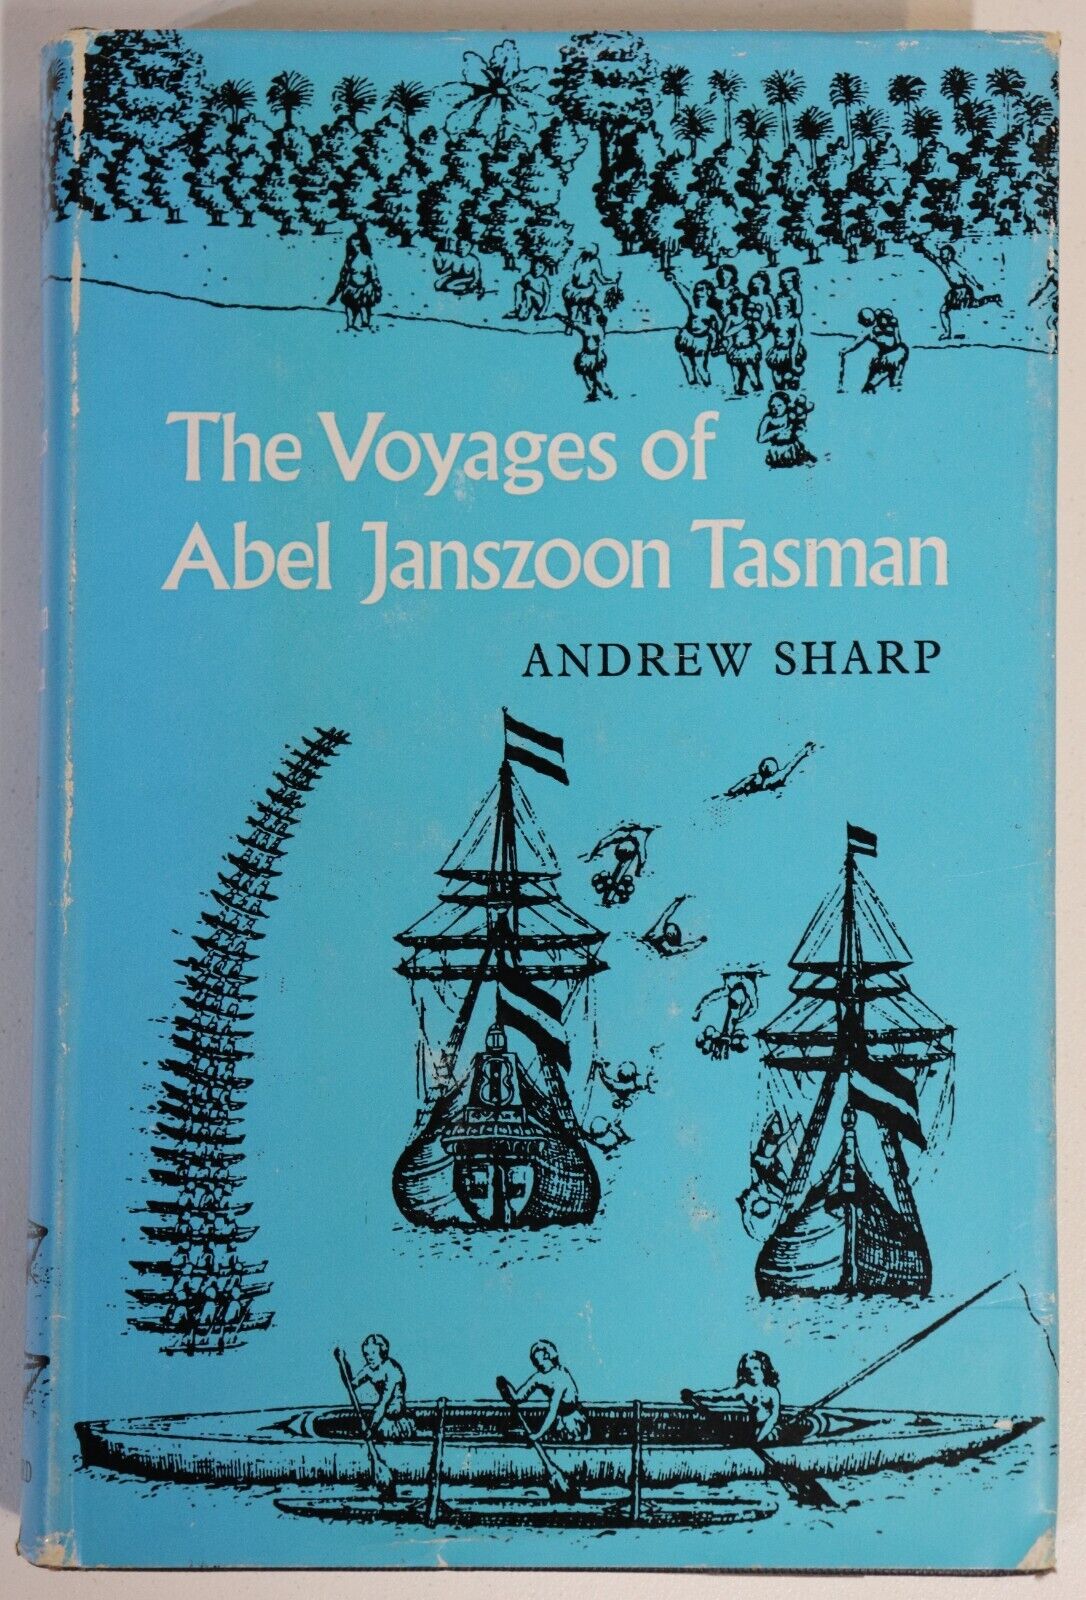 The Voyages of Abel Janszoon Tasman - 1968 - Australian Discovery History Book